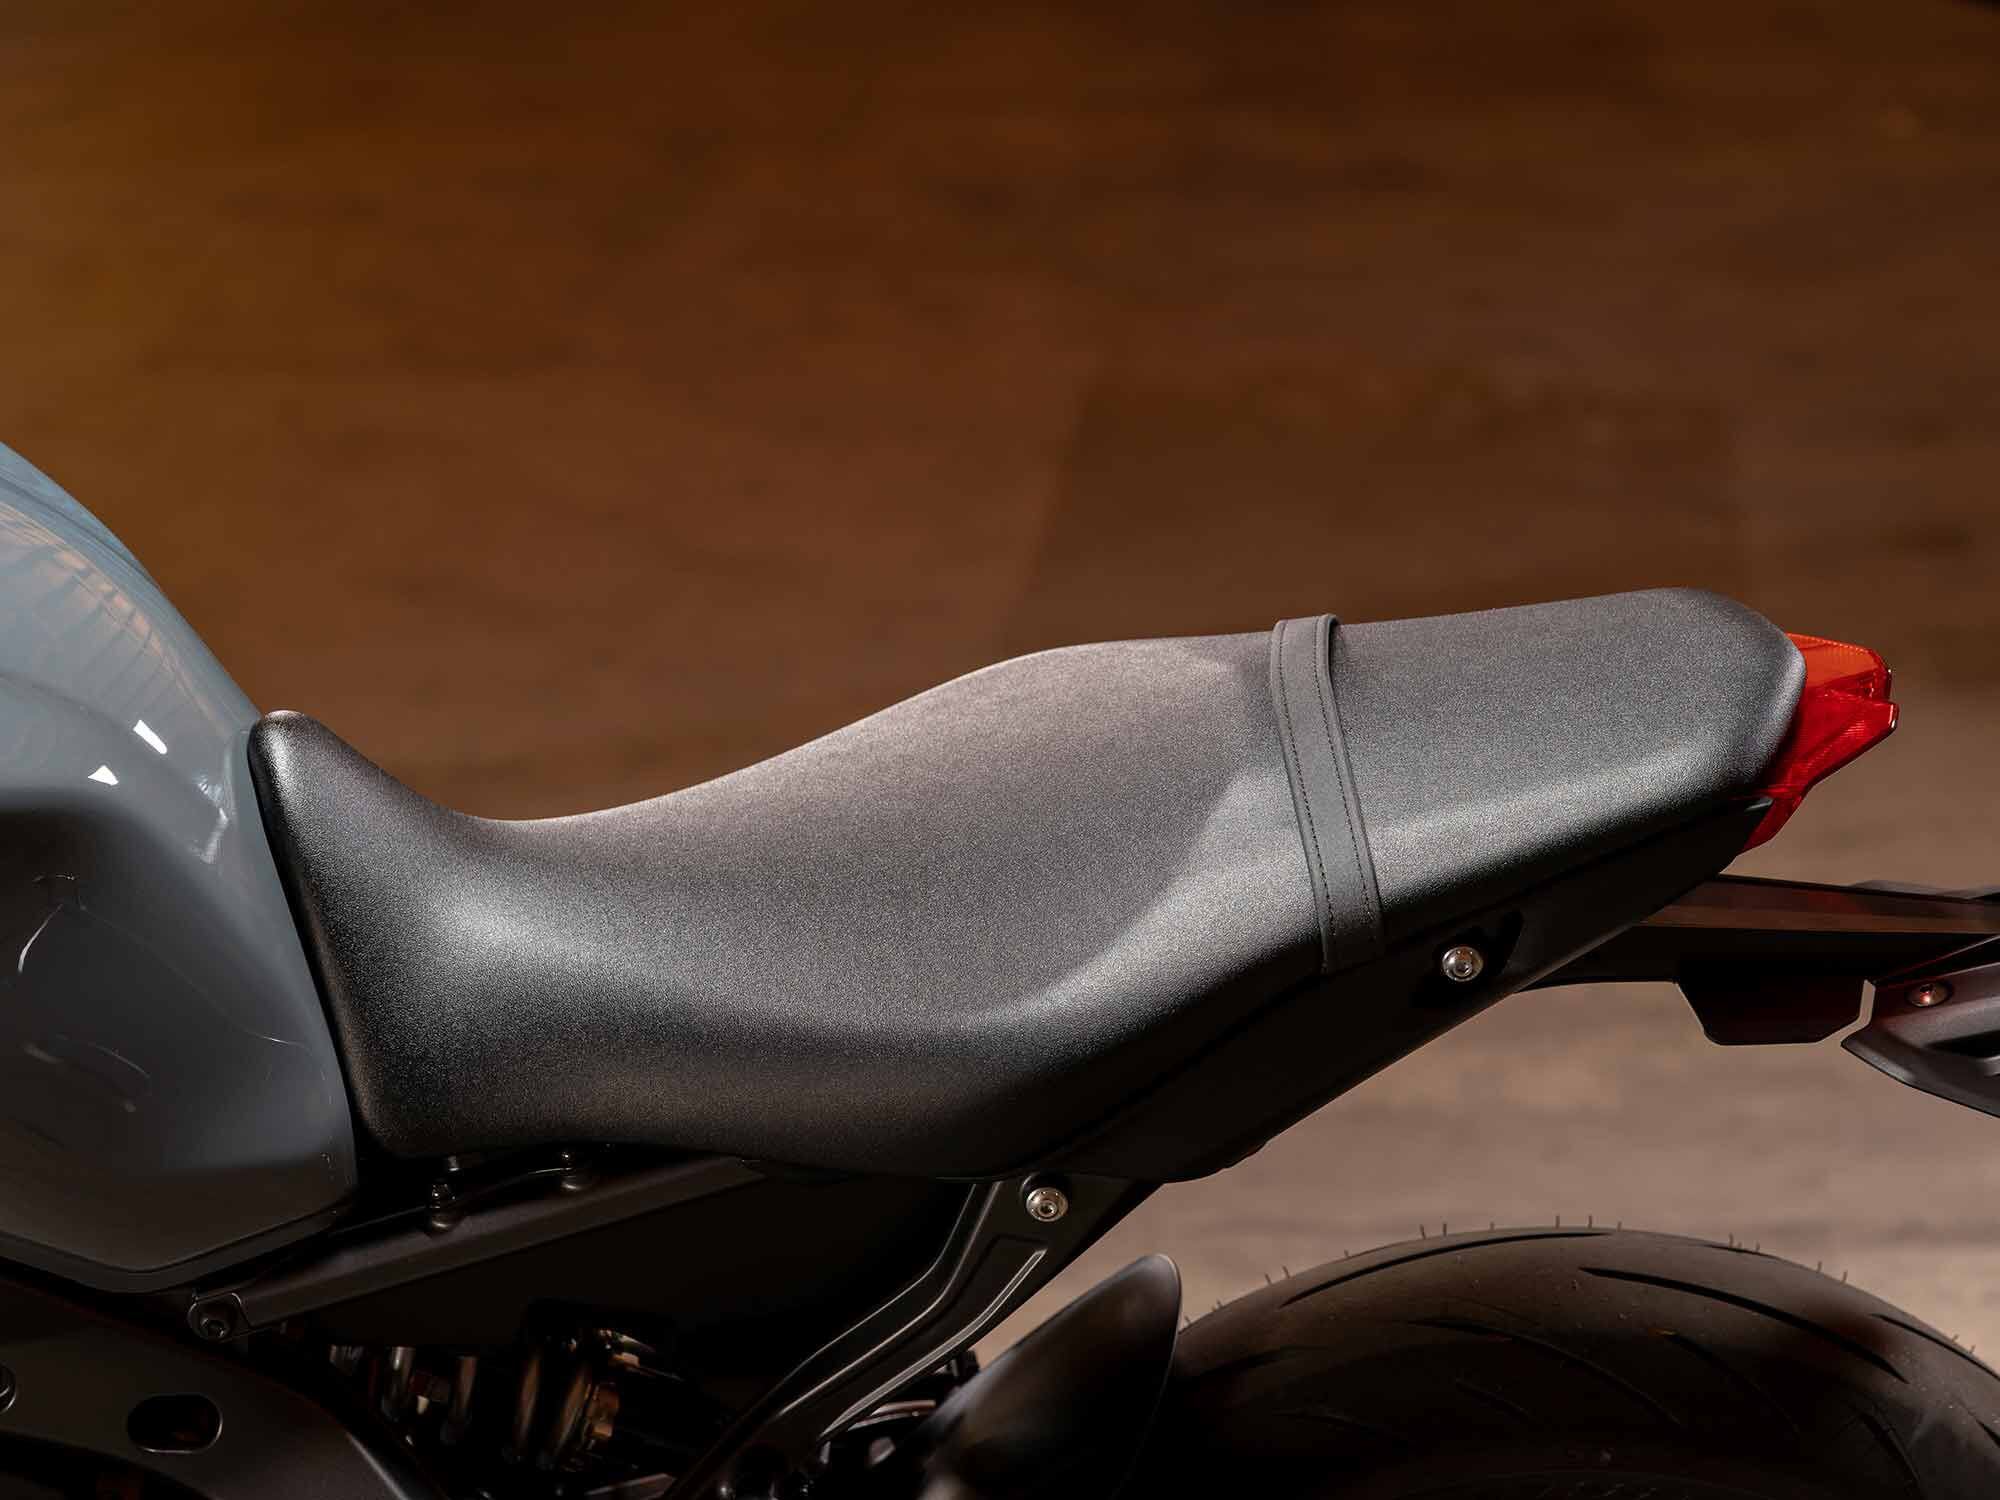 The MT-09’s seat isn’t too tall, nor too short. It proved comfortable during the course of our 93-mile test ride.